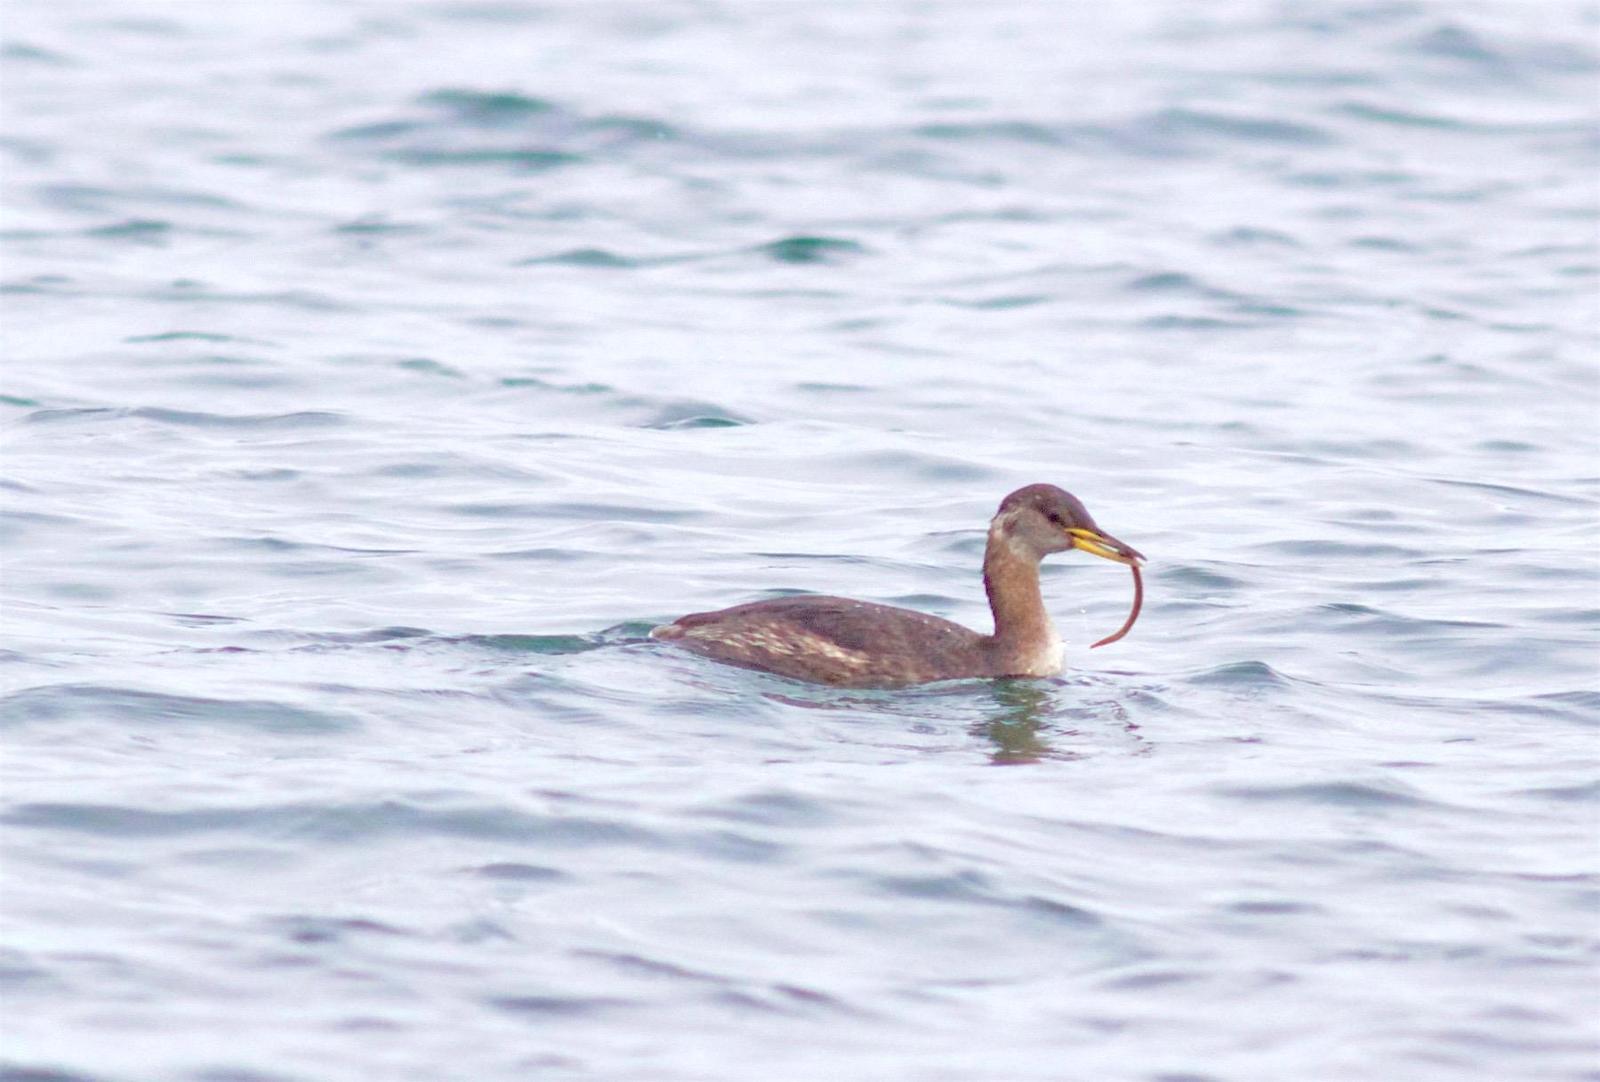 Red-necked Grebe Photo by Kathryn Keith